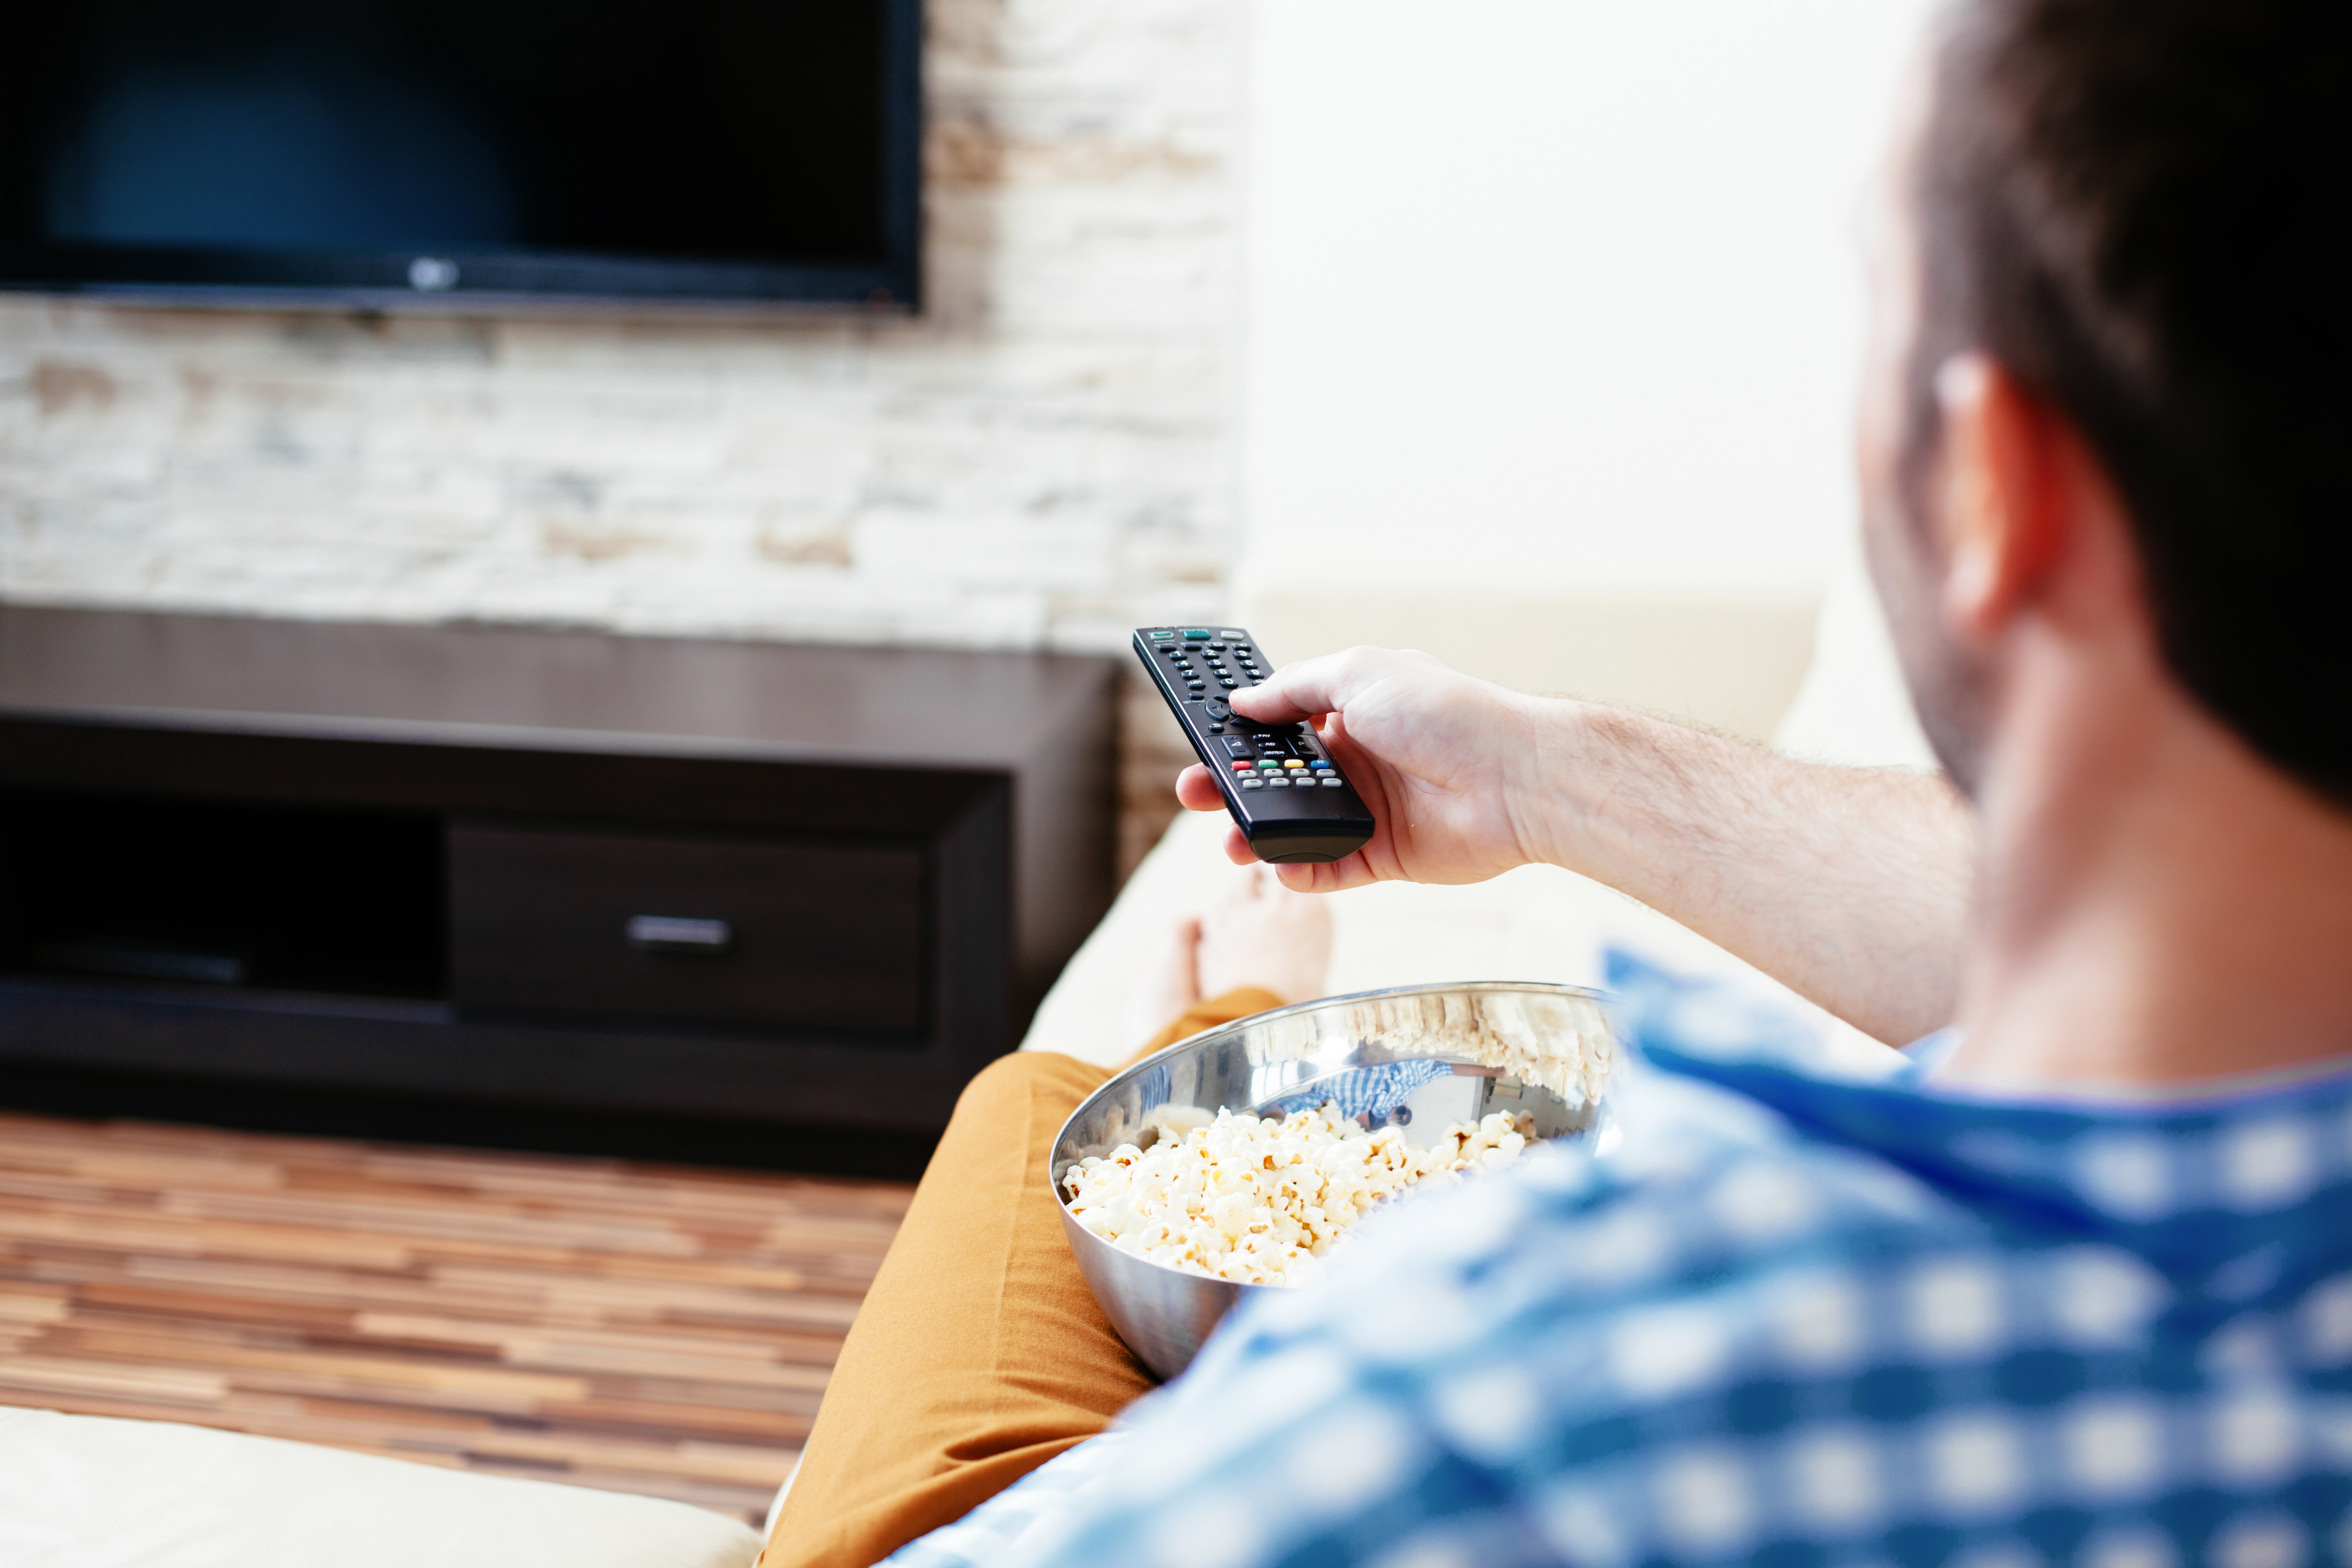 Catch-up technology such as BBC iPlayer, and subscription services including Netflix, meant 79% of viewers watch multiple episodes of their favourite pre-recorded shows - despite one-third (32%) of adults saying it resulted in them missing sleep (iStock)